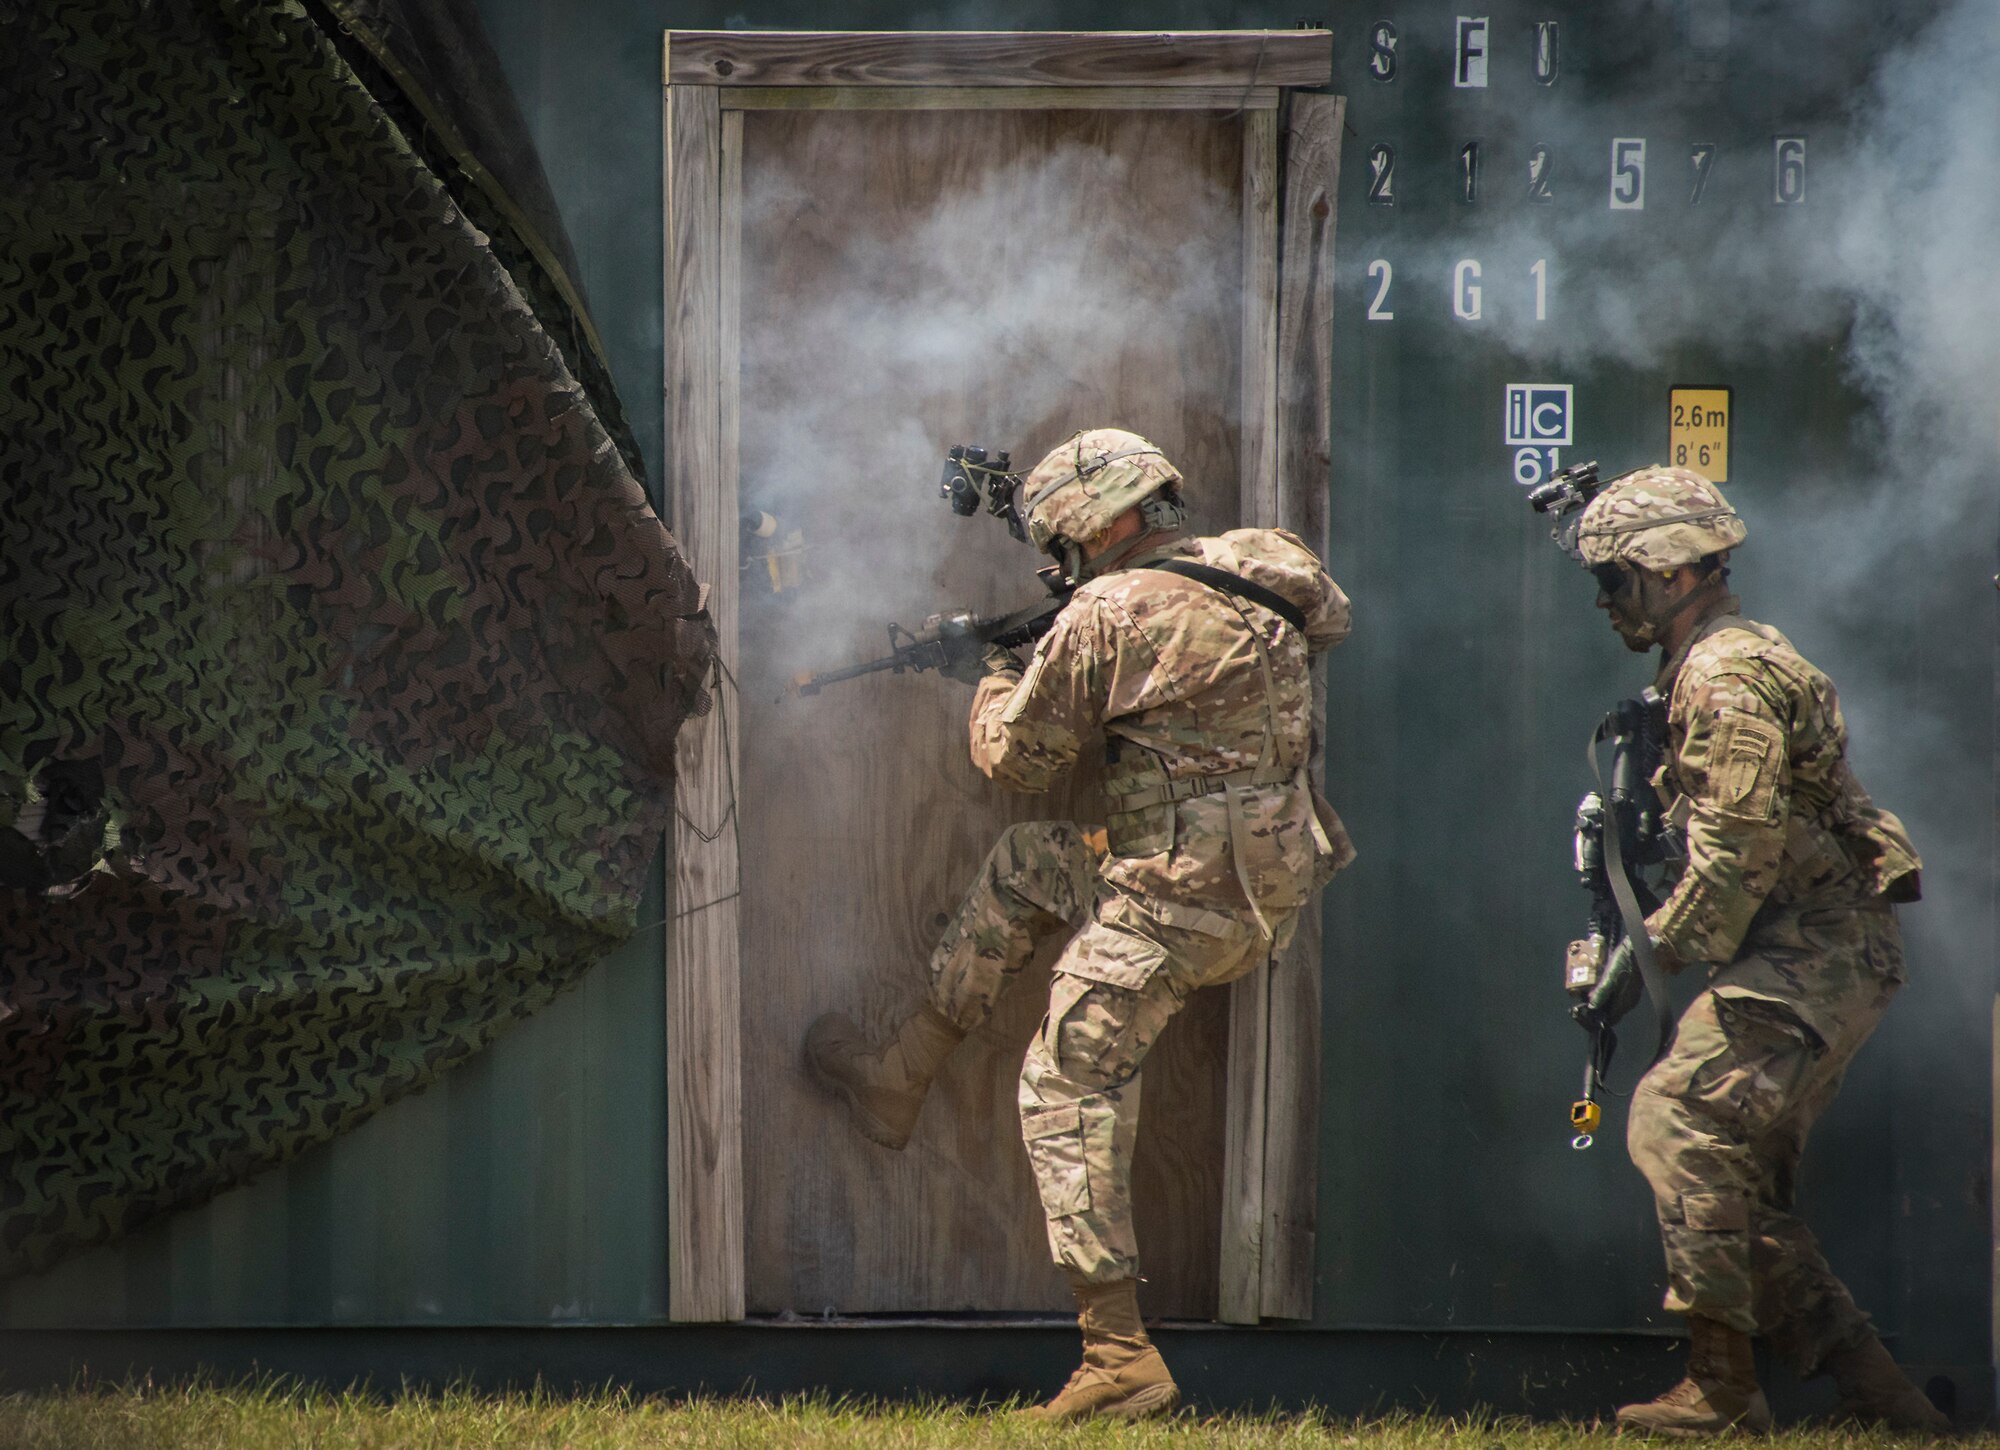 An Army Ranger kicks in a door during a demonstration at the 6th Ranger Training Battalion’s open house event May 5, 2018, at Eglin Air Force Base, Fla. The event was a chance for the public to learn how Rangers train and operate. The event displays showed equipment, weapons, a reptile zoo, face painting and weapon firing among others. The demonstrations showed off hand-to-hand combat, a parachute jump, snake show and Rangers in action. (U.S. Air Force photo by Samuel King Jr.)